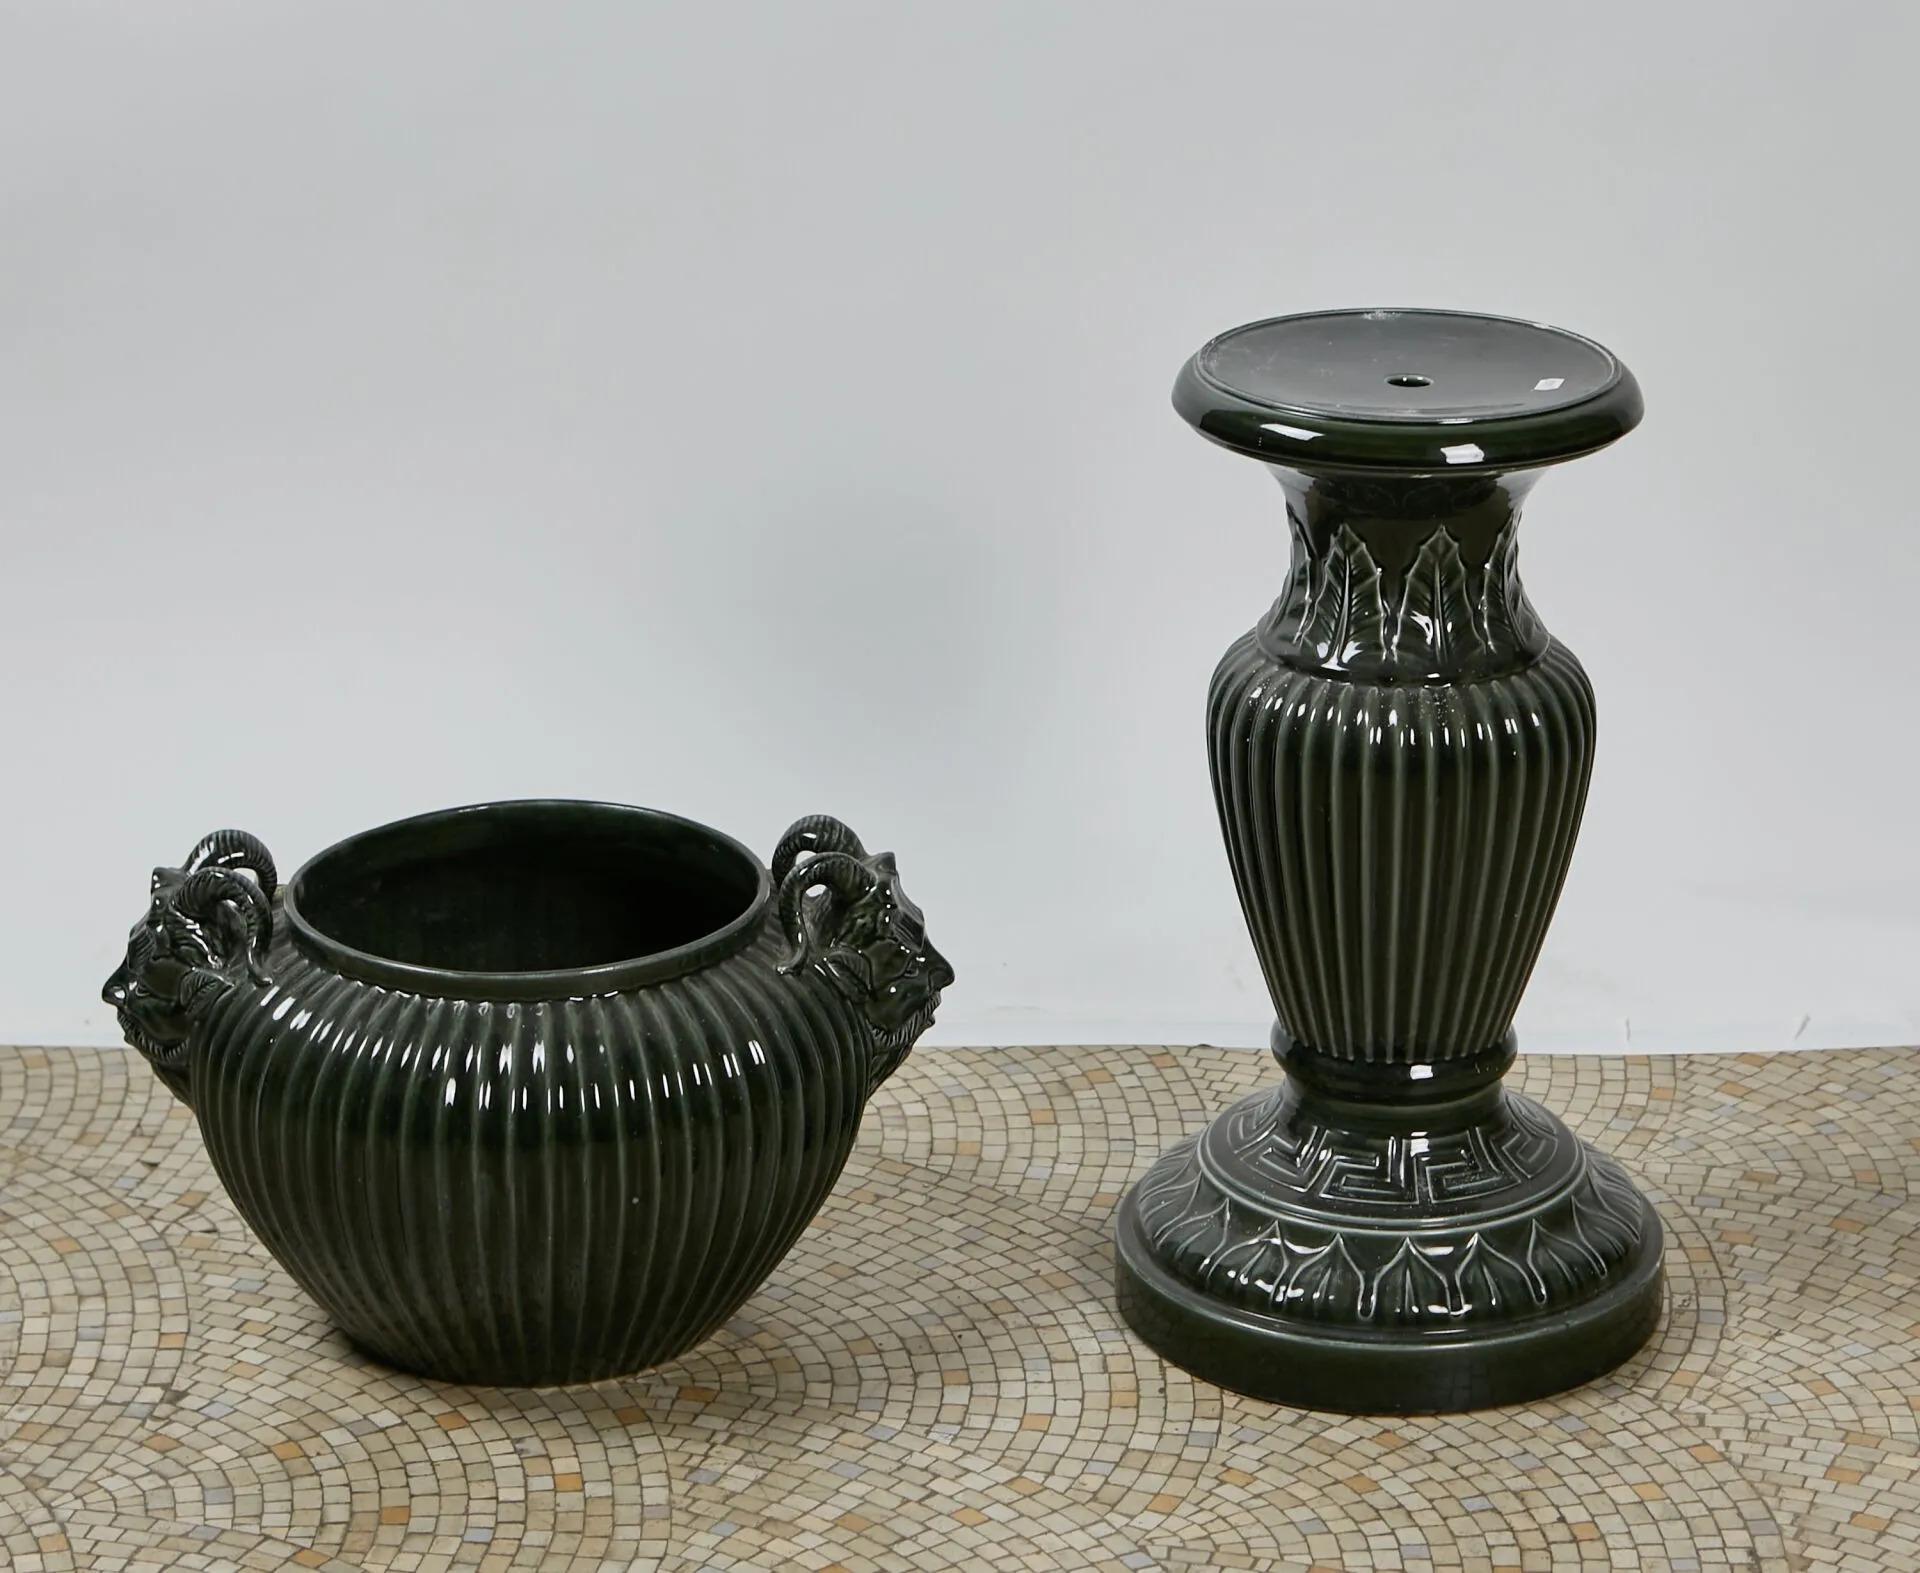 ribbed ceramic pot holder and pedestal,
decoration of head of fauns, circa 1900